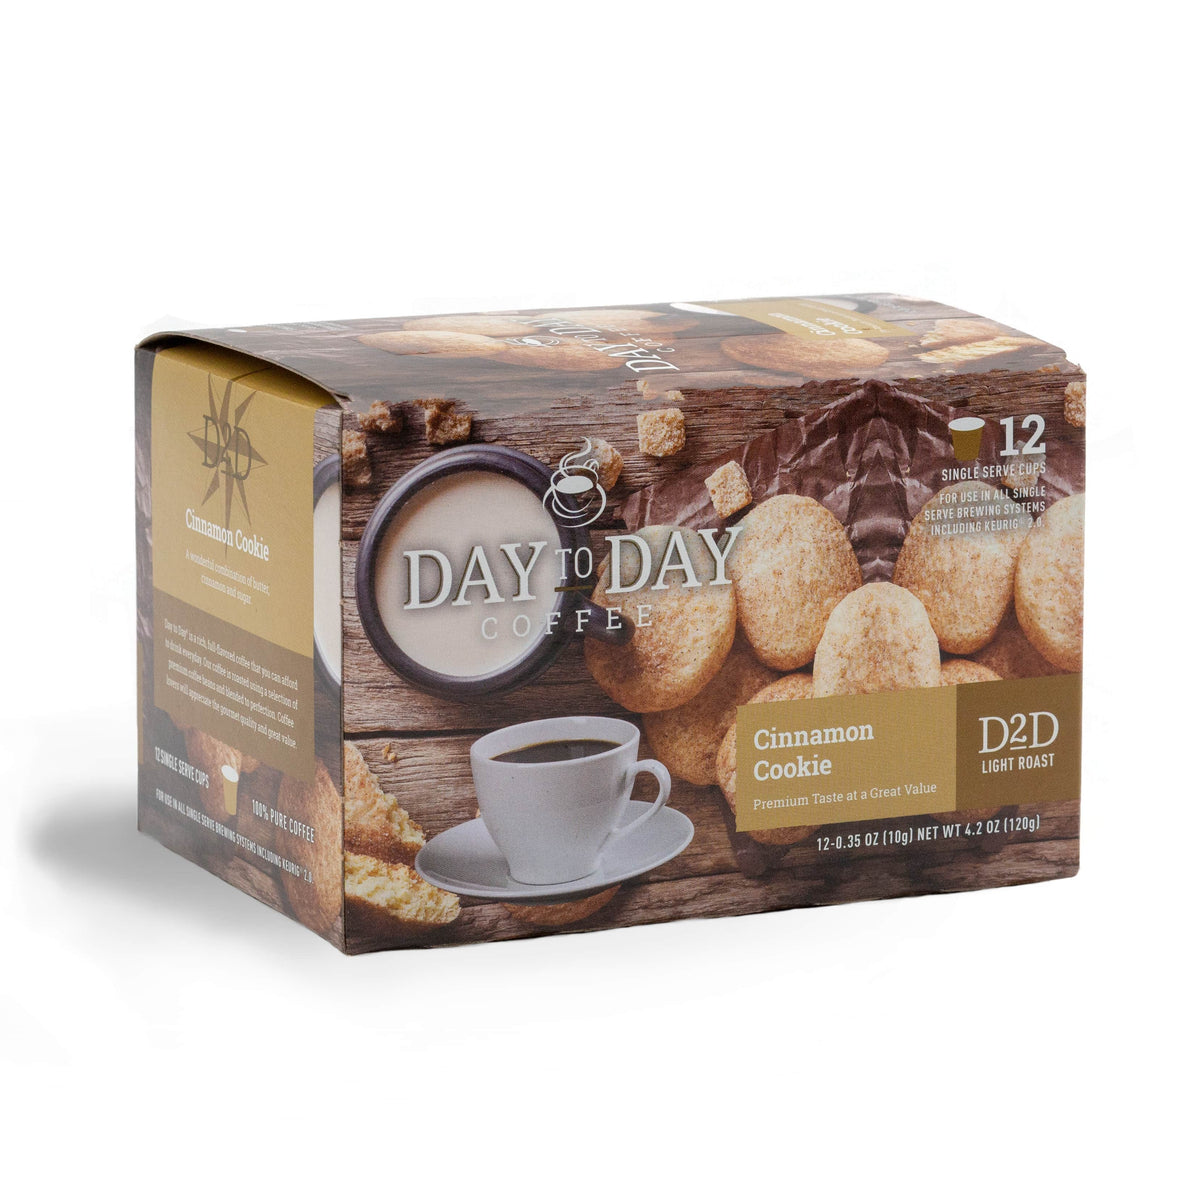 Day to day coffee 12 count cinnamon cookie light roast coffee pods for single serve coffee brewer